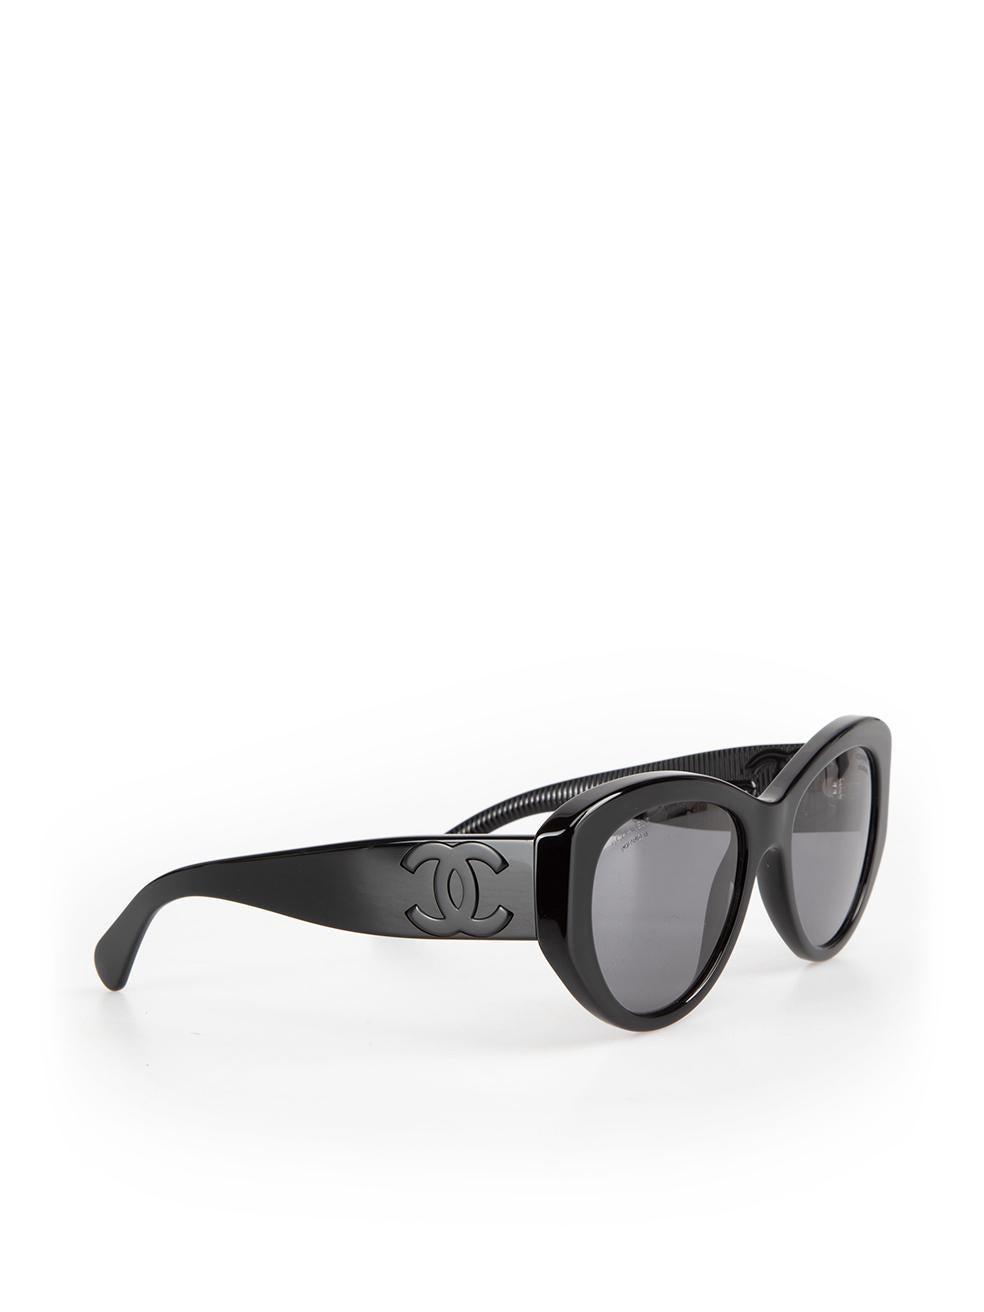 Chanel Black Butterfly Frame Sunglasses In New Condition For Sale In London, GB